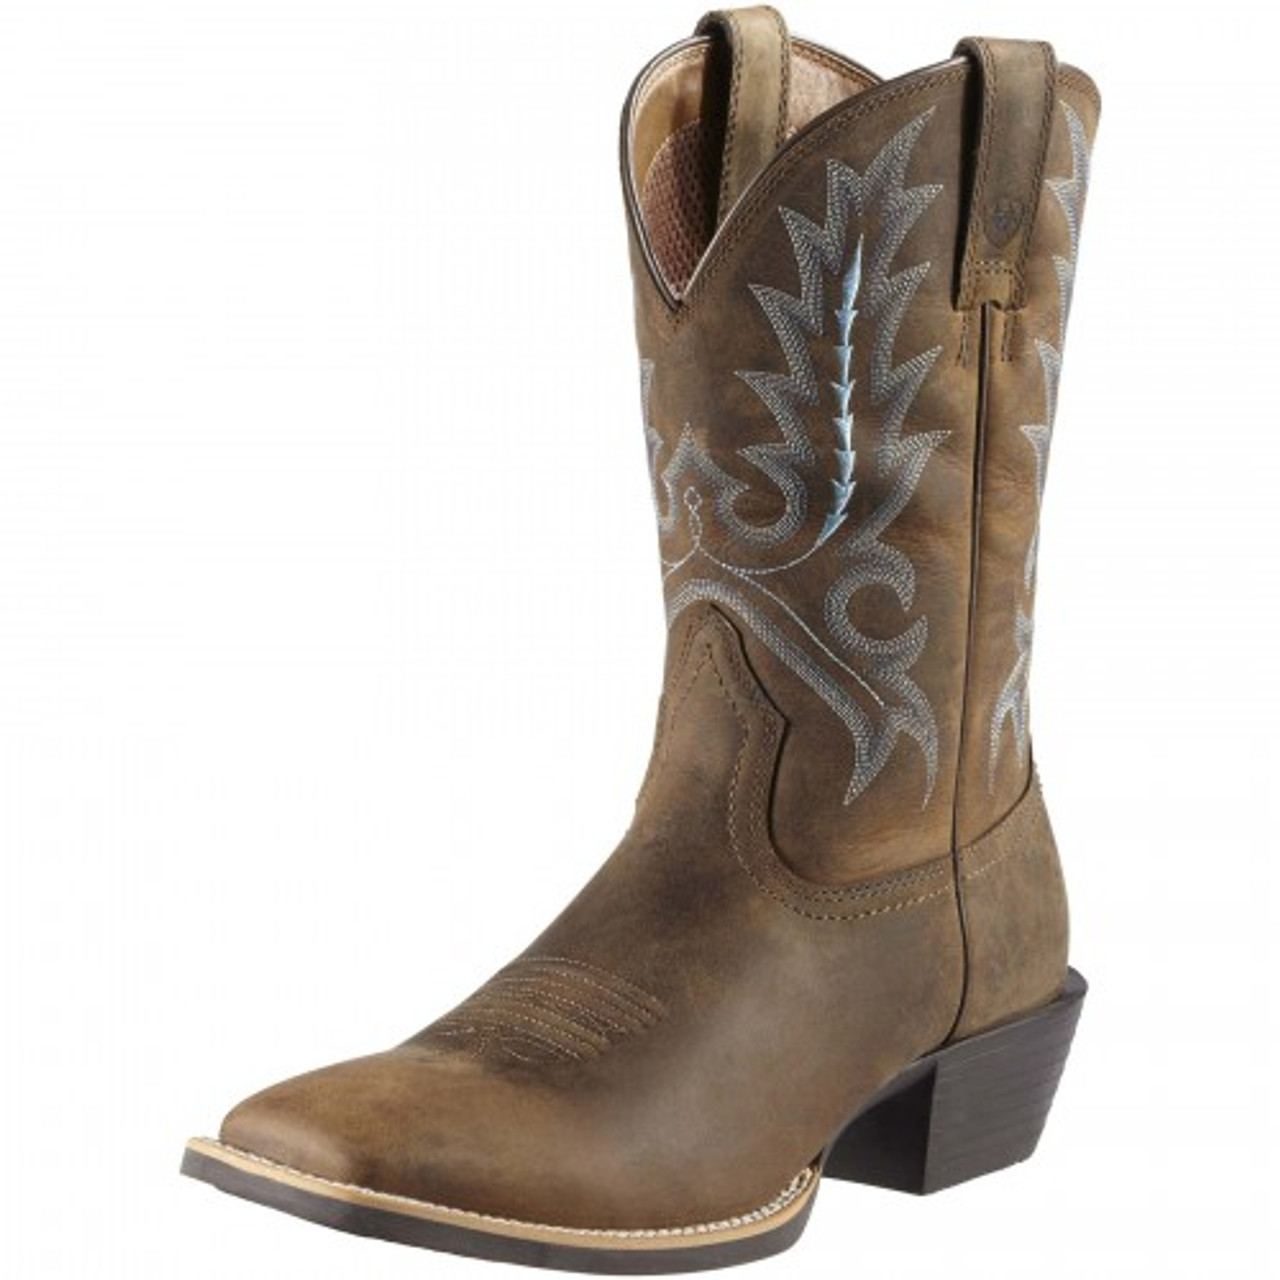 Ariat Men's Boots - Sport Outfitter - Distressed Brown